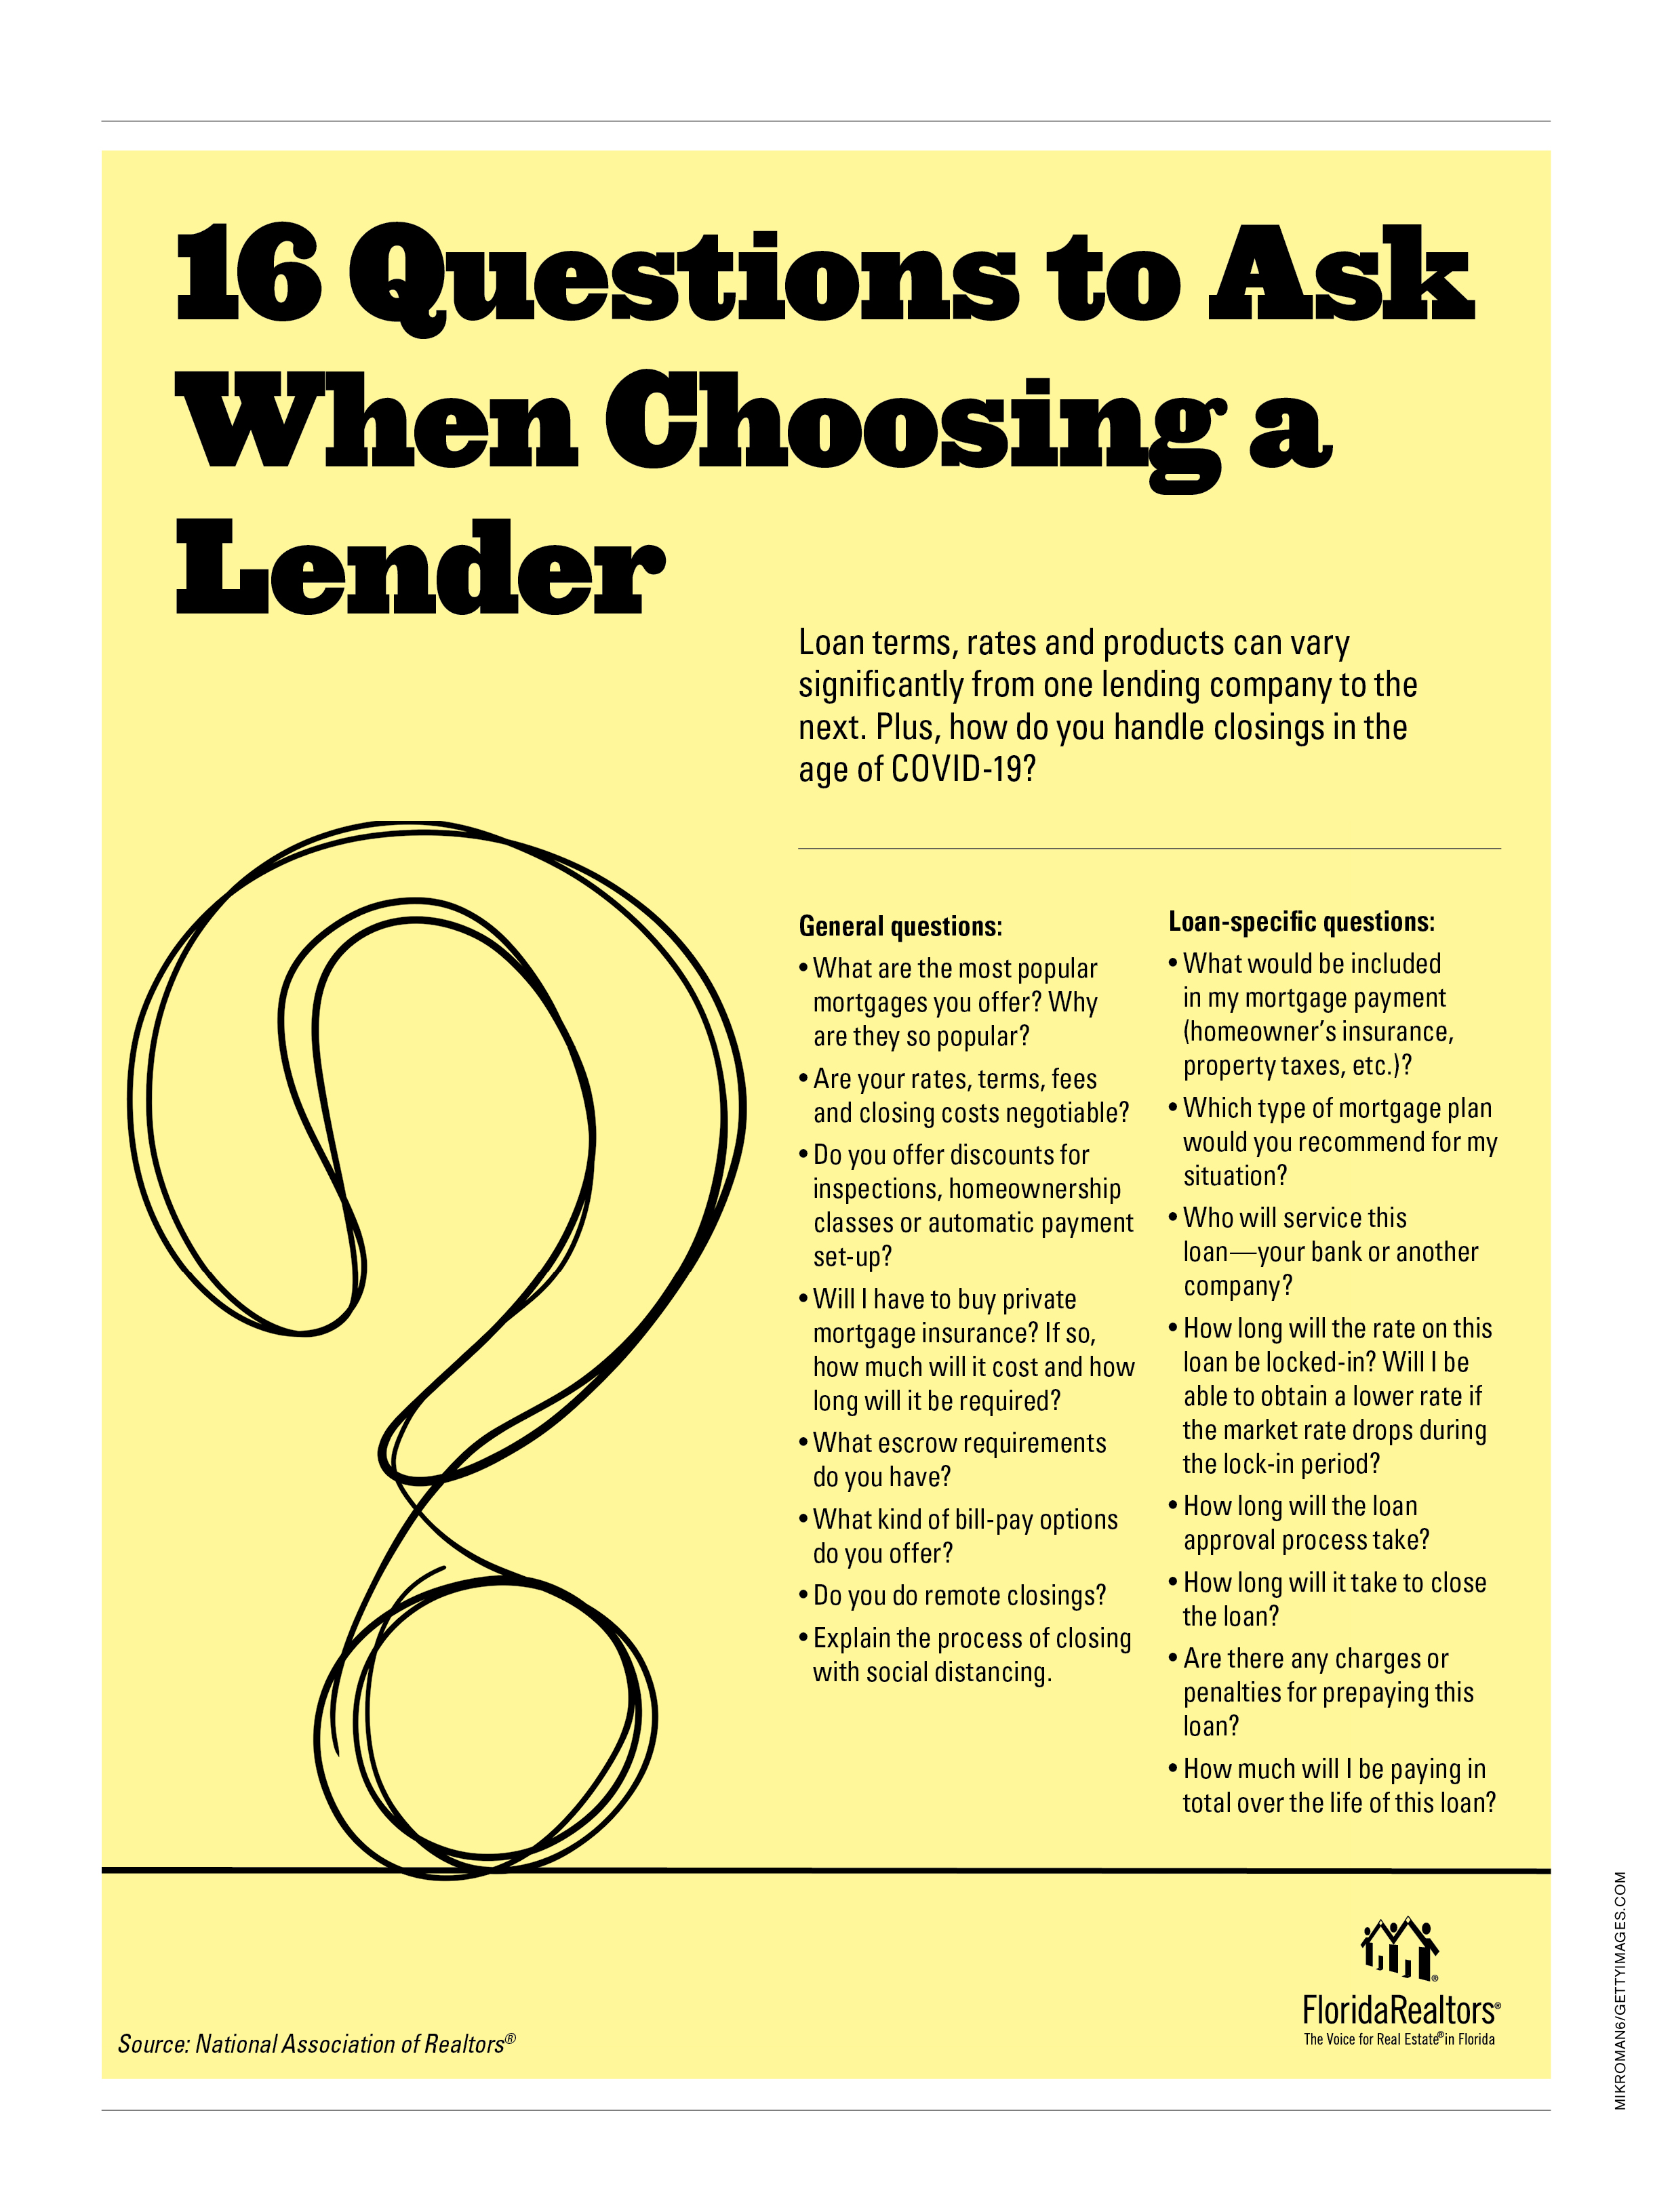 What Are Some Questions To Ask A Mortgage Lender When Considering A Mortgage Option?